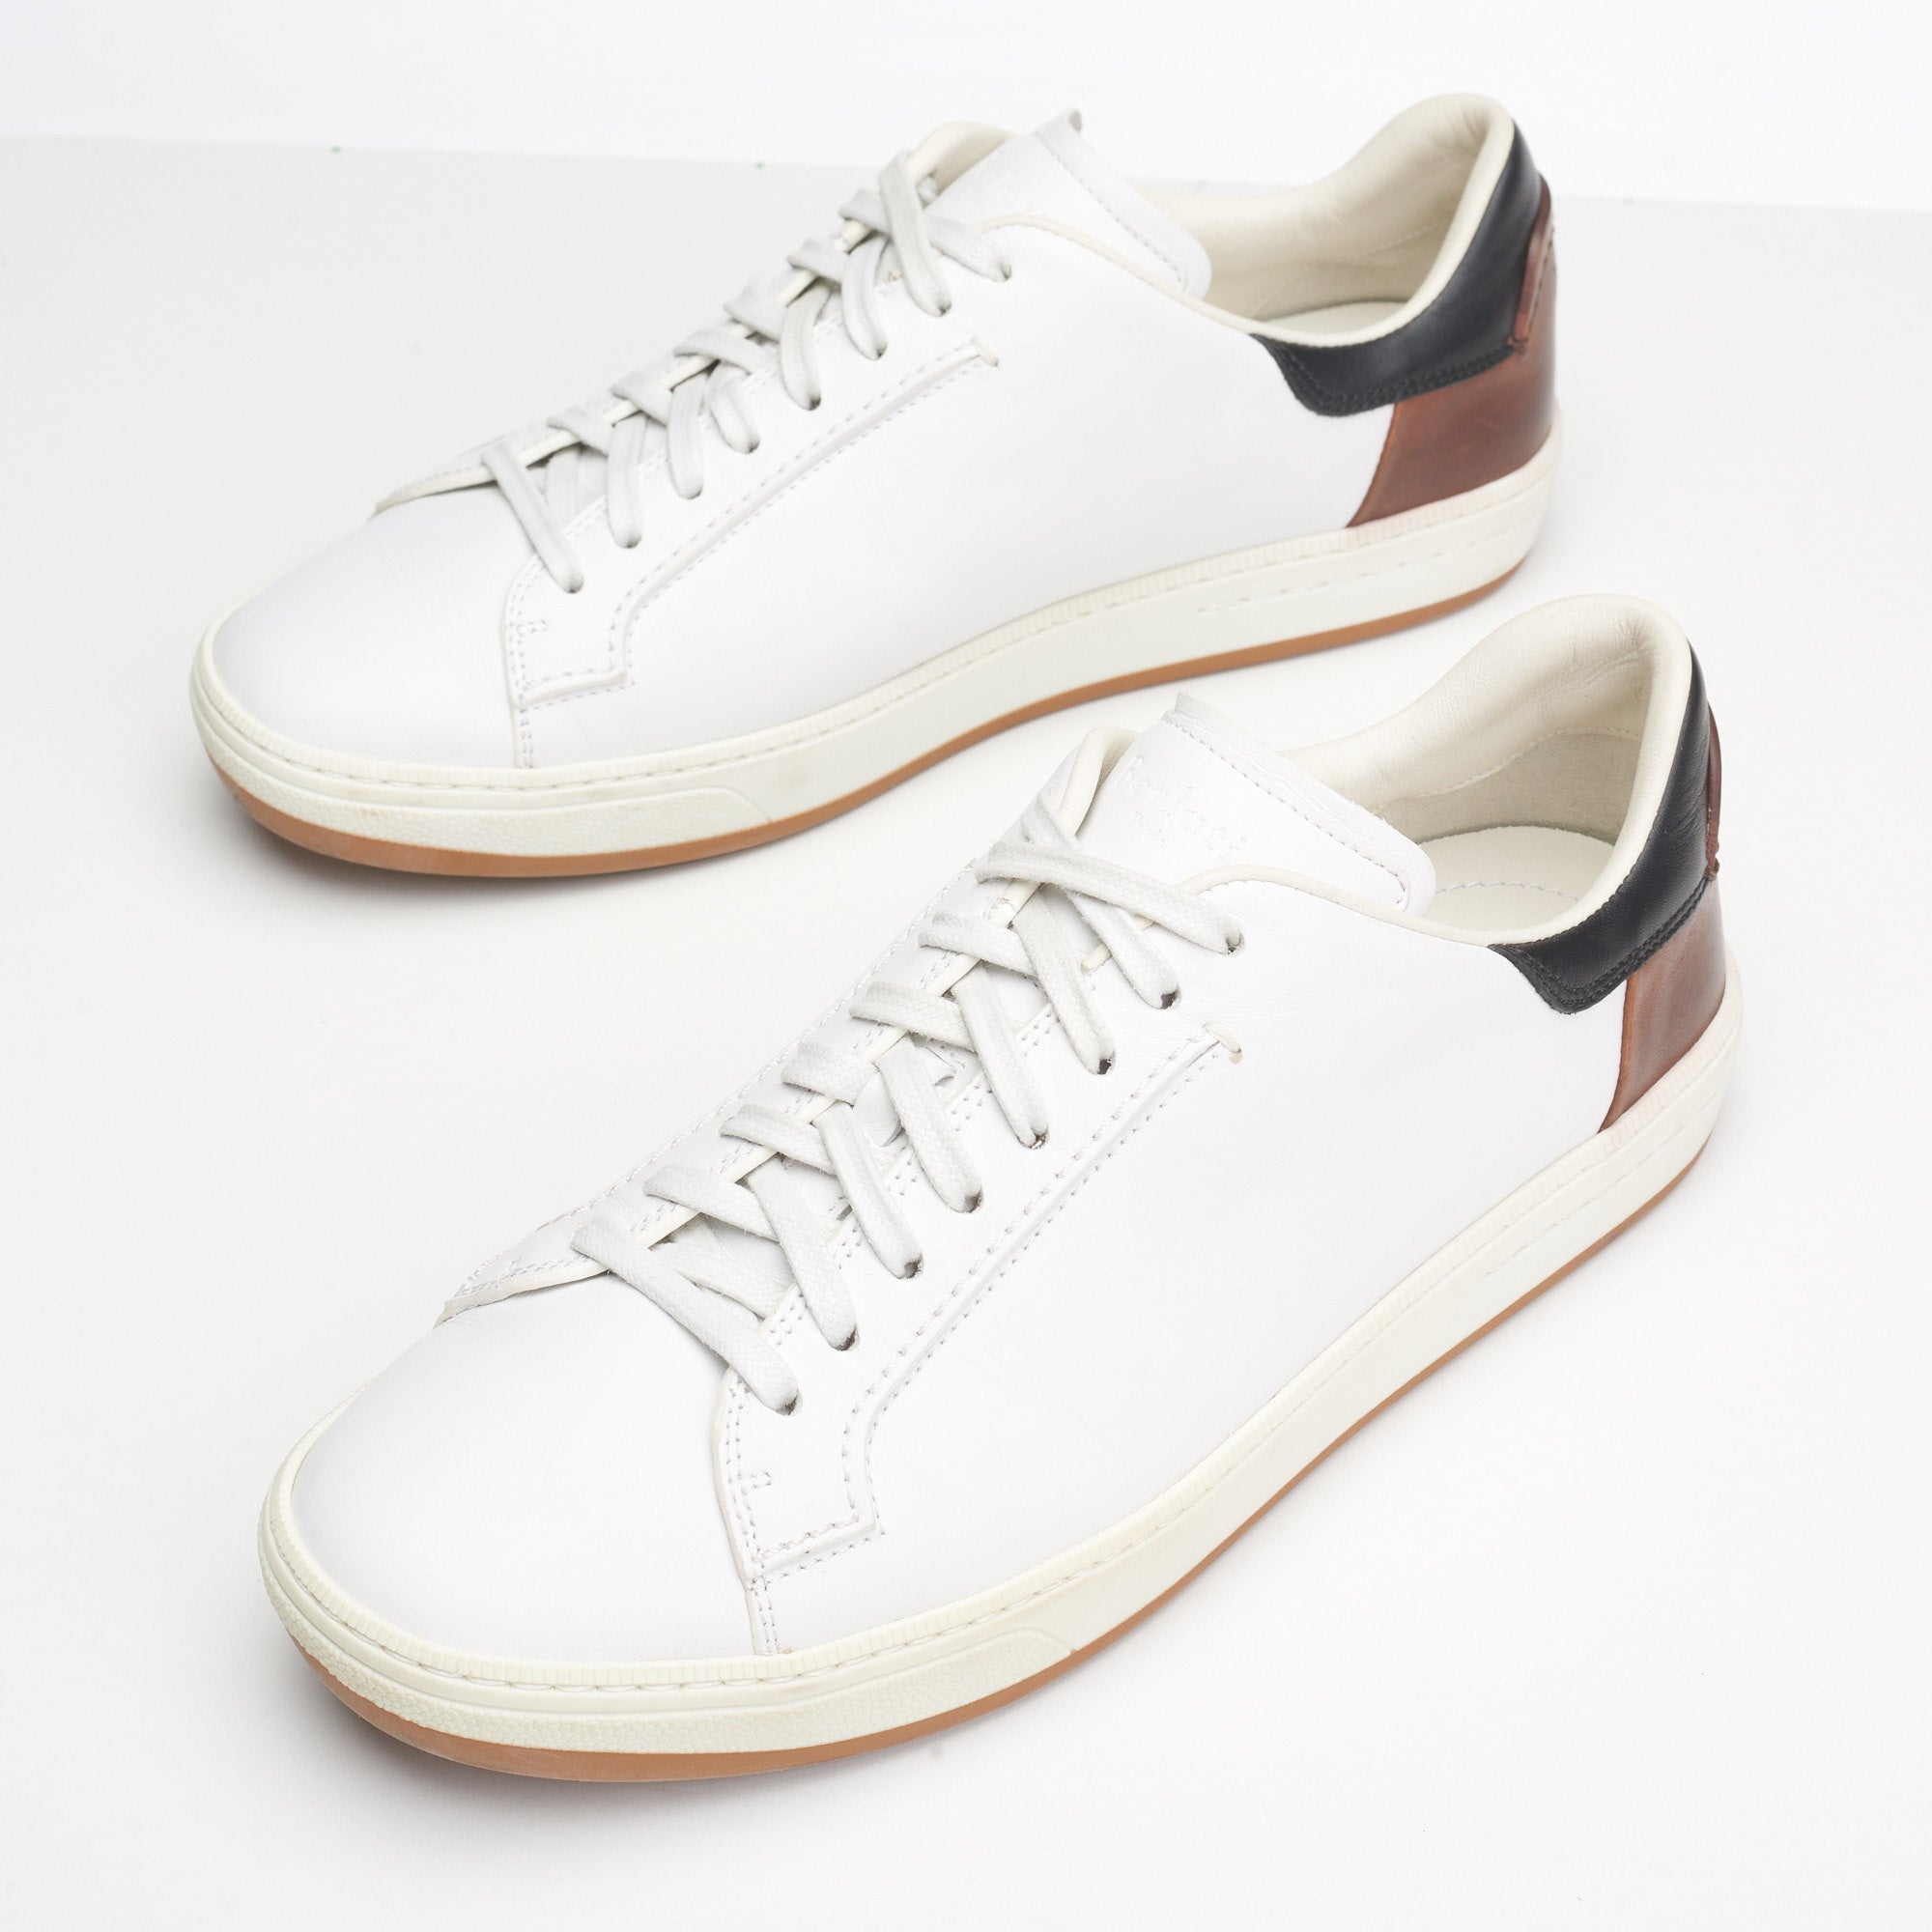 KOMEHYO|Berluti Berluti Sneakers|Berluti|Men's Fashion|Shoes|Sneakers|【Official】  KOMEHYO, one of the largest reuse department stores in the Japan,